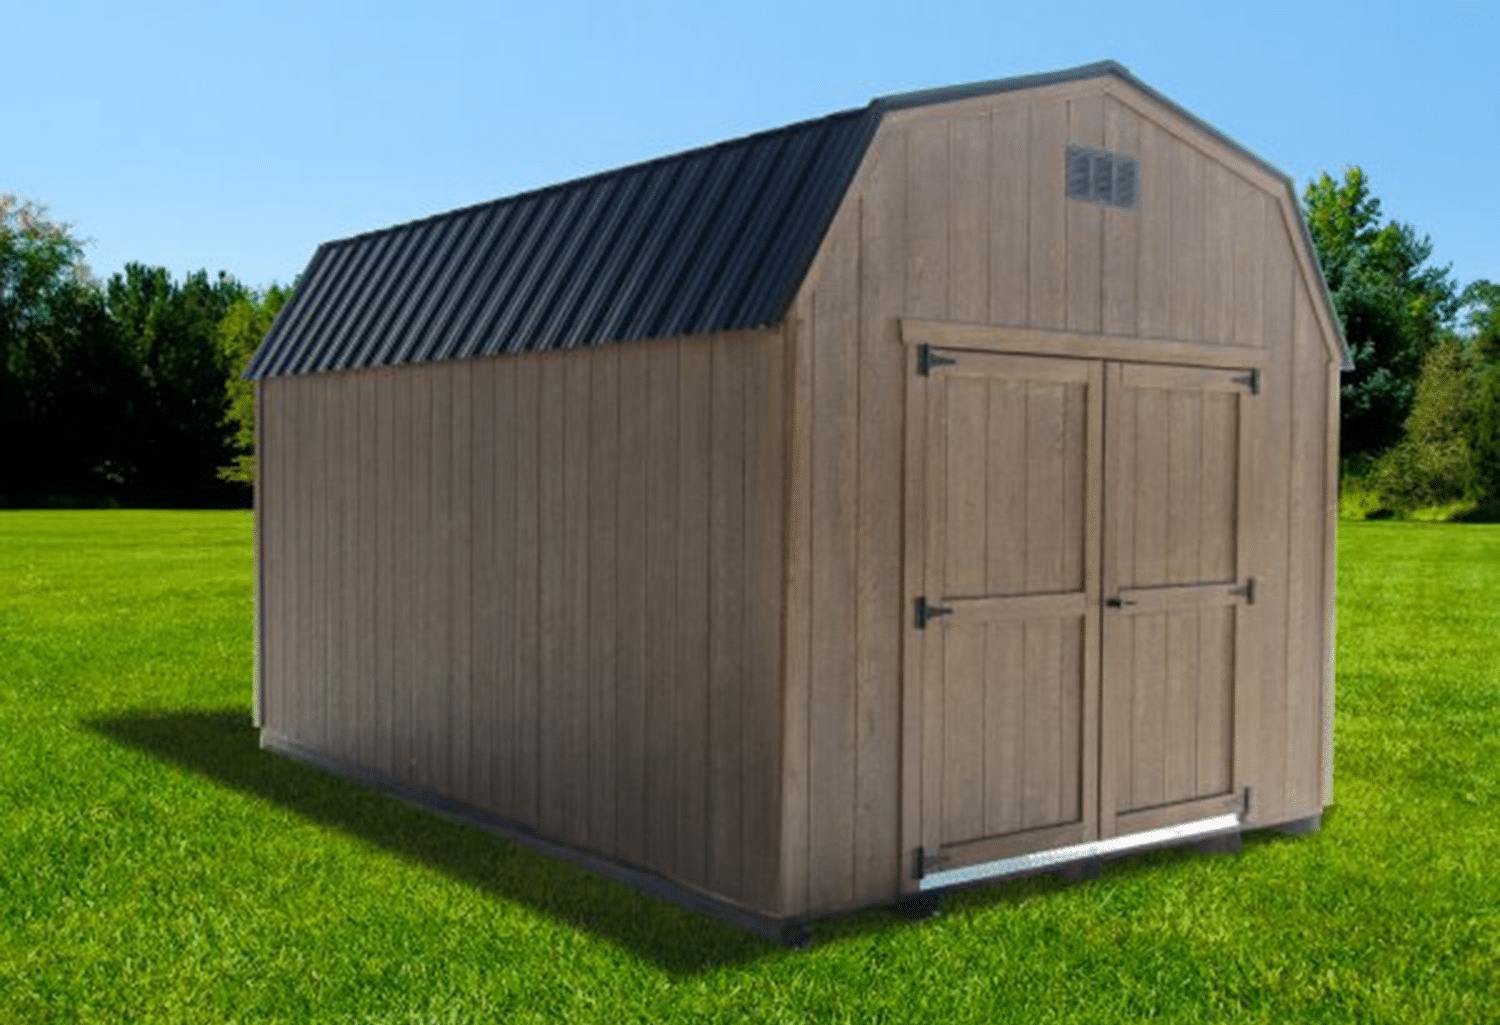 Buy Sheds Now | Heritage Structures | New England Dutch Barn | Saver Series